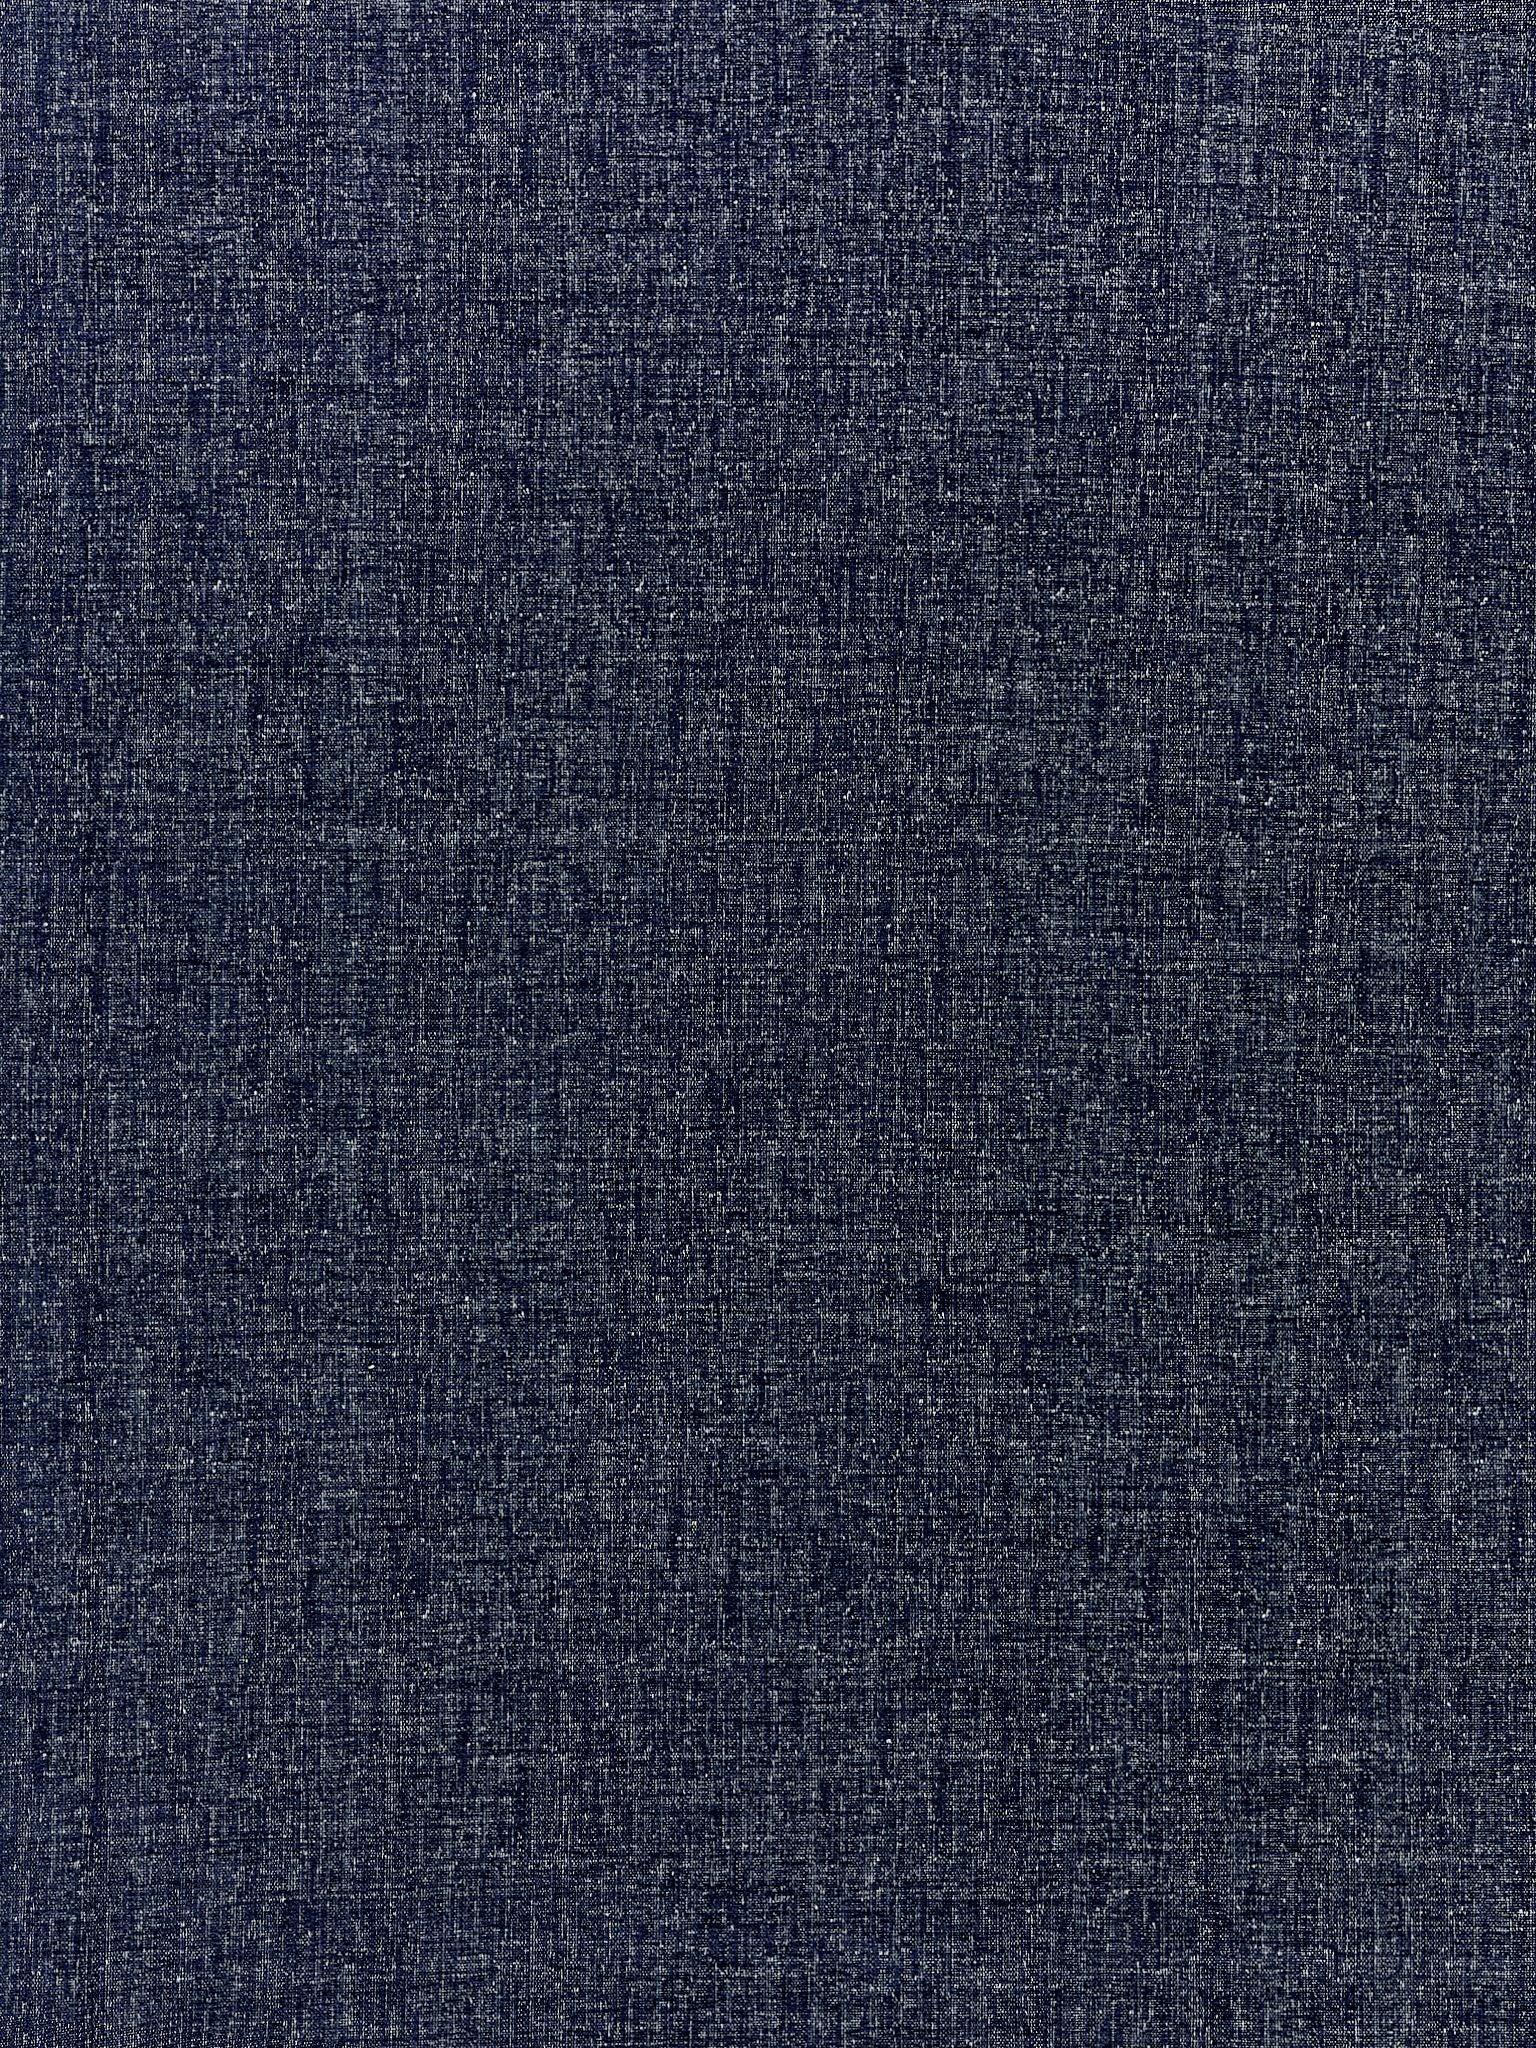 Spencer Chenille fabric in indigo color - pattern number BK 0006K65117 - by Scalamandre in the Old World Weavers collection